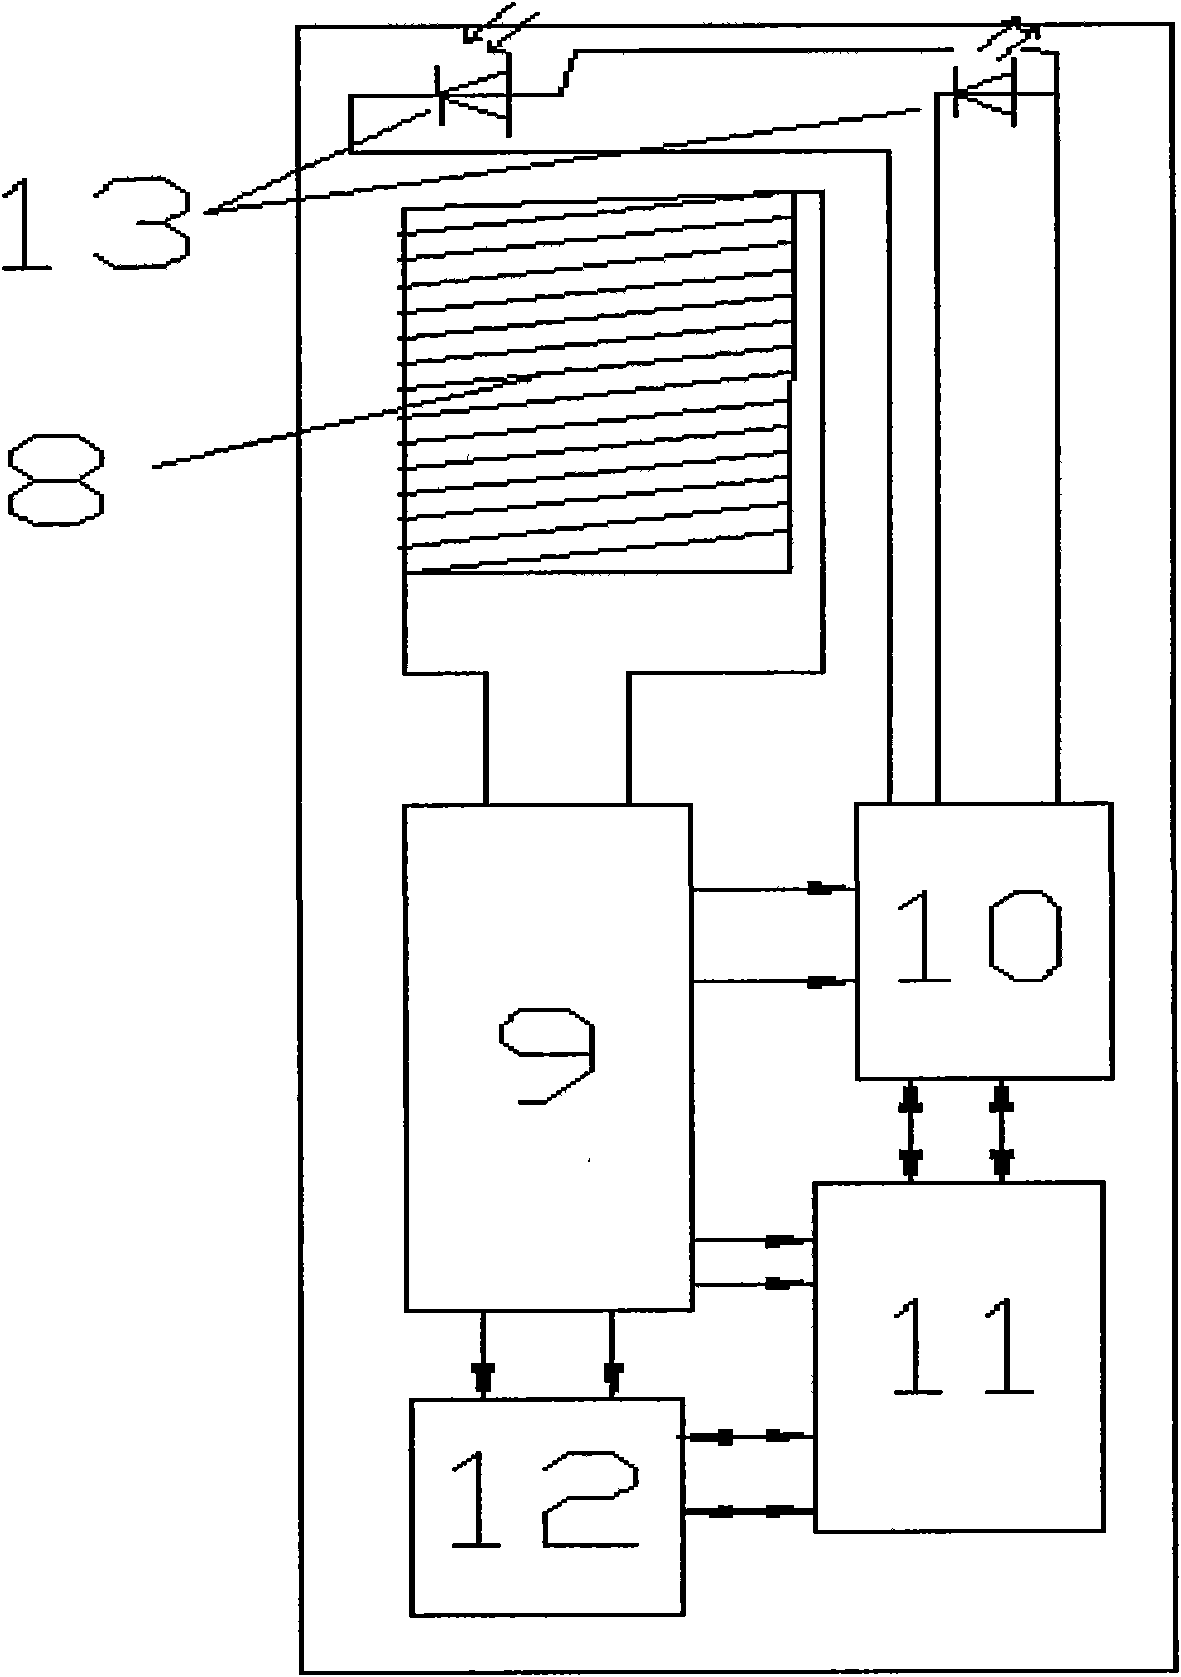 Non-electrical-contact type portable memory and read-write device